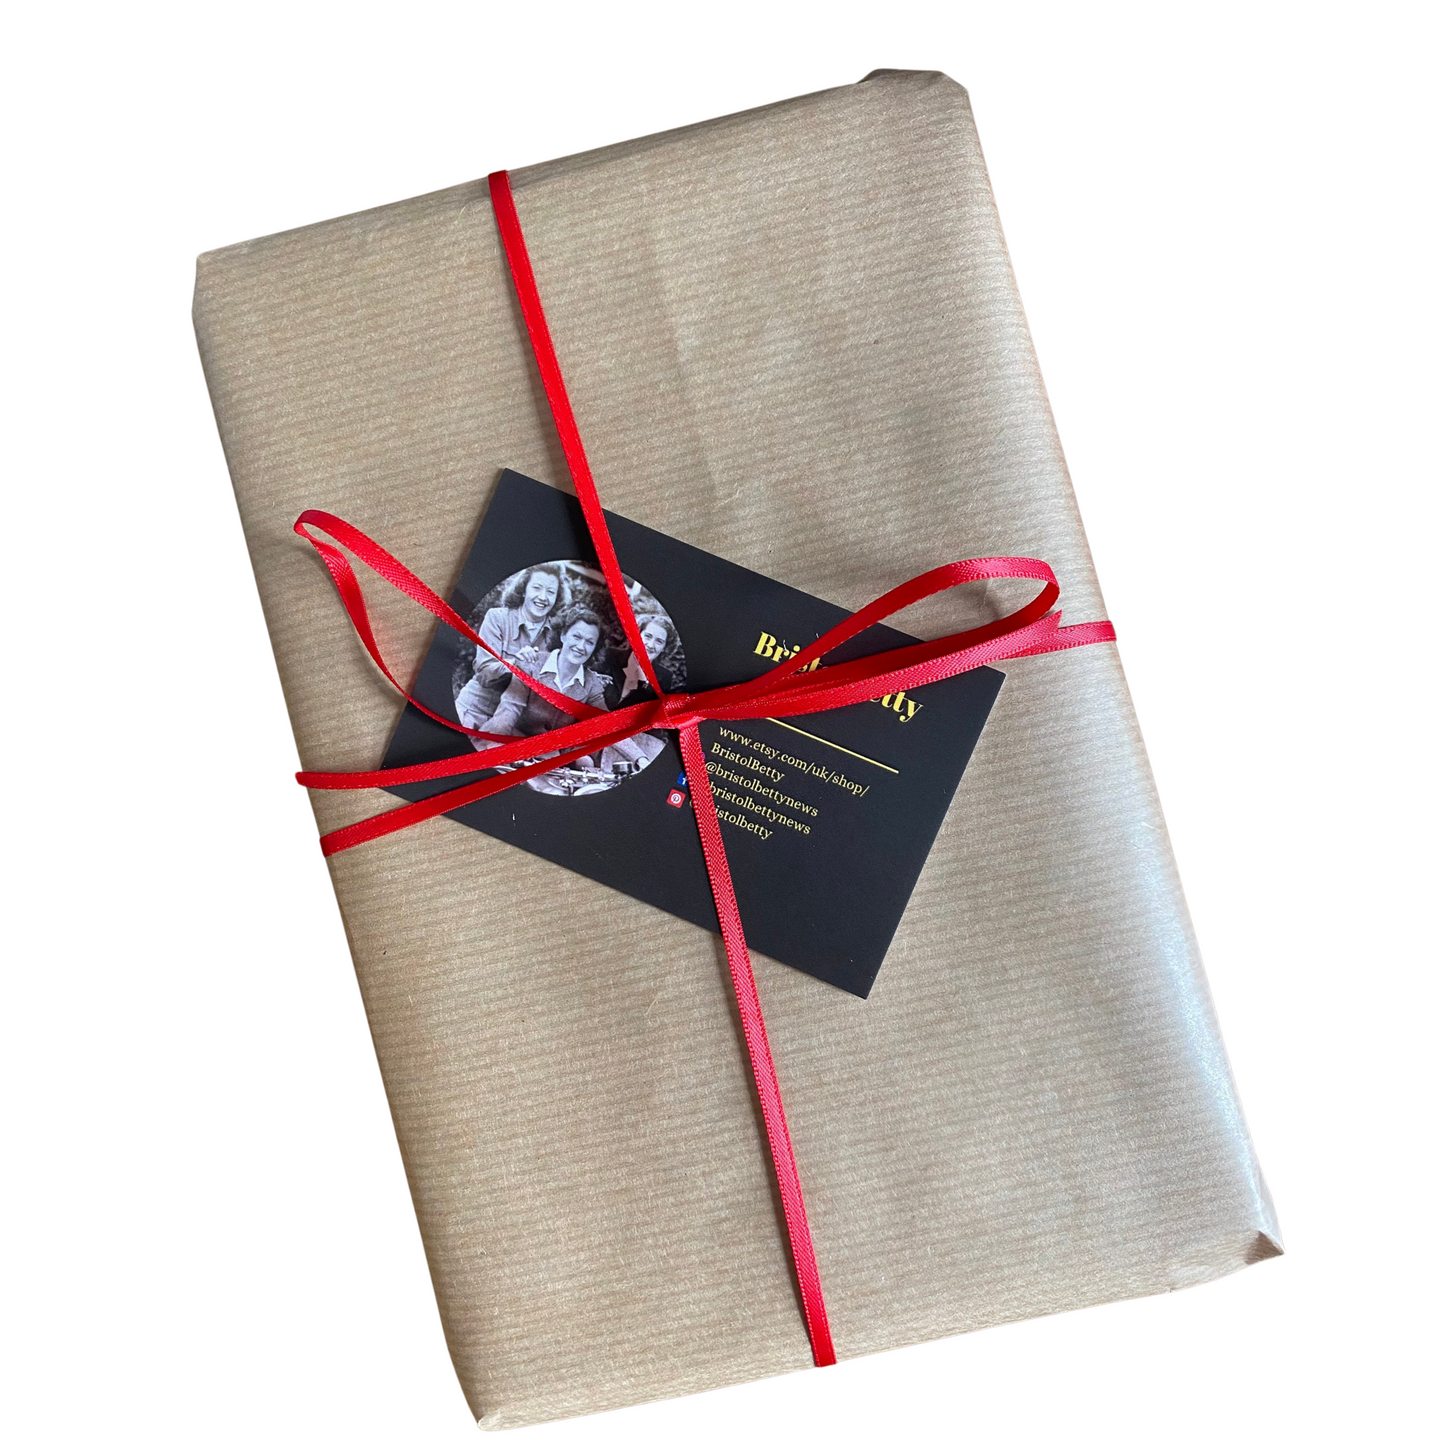 All book orders are wrapped in Kraft paper and ribbon 